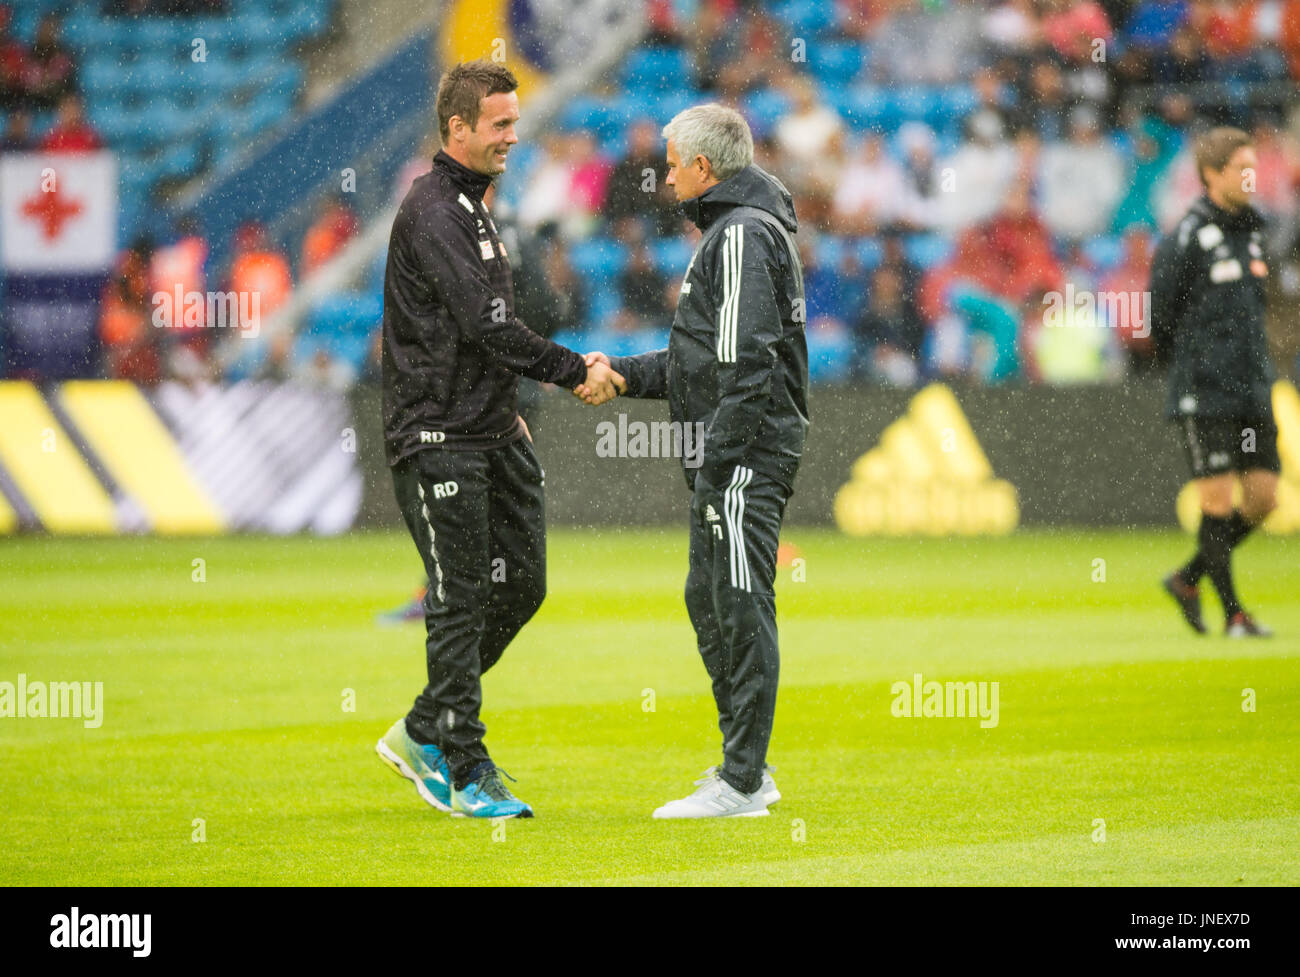 Oslo, Norway. 30th July, 2017. Norway, Oslo – July 30th 2017. Manchester United manager Jose Mourinho greets Vålerenga manager Ronny Deila during the football club friendly between Vålerenga and Manchester United at Ullevaal Stadion. Credit: Gonzales Photo/Alamy Live News Stock Photo